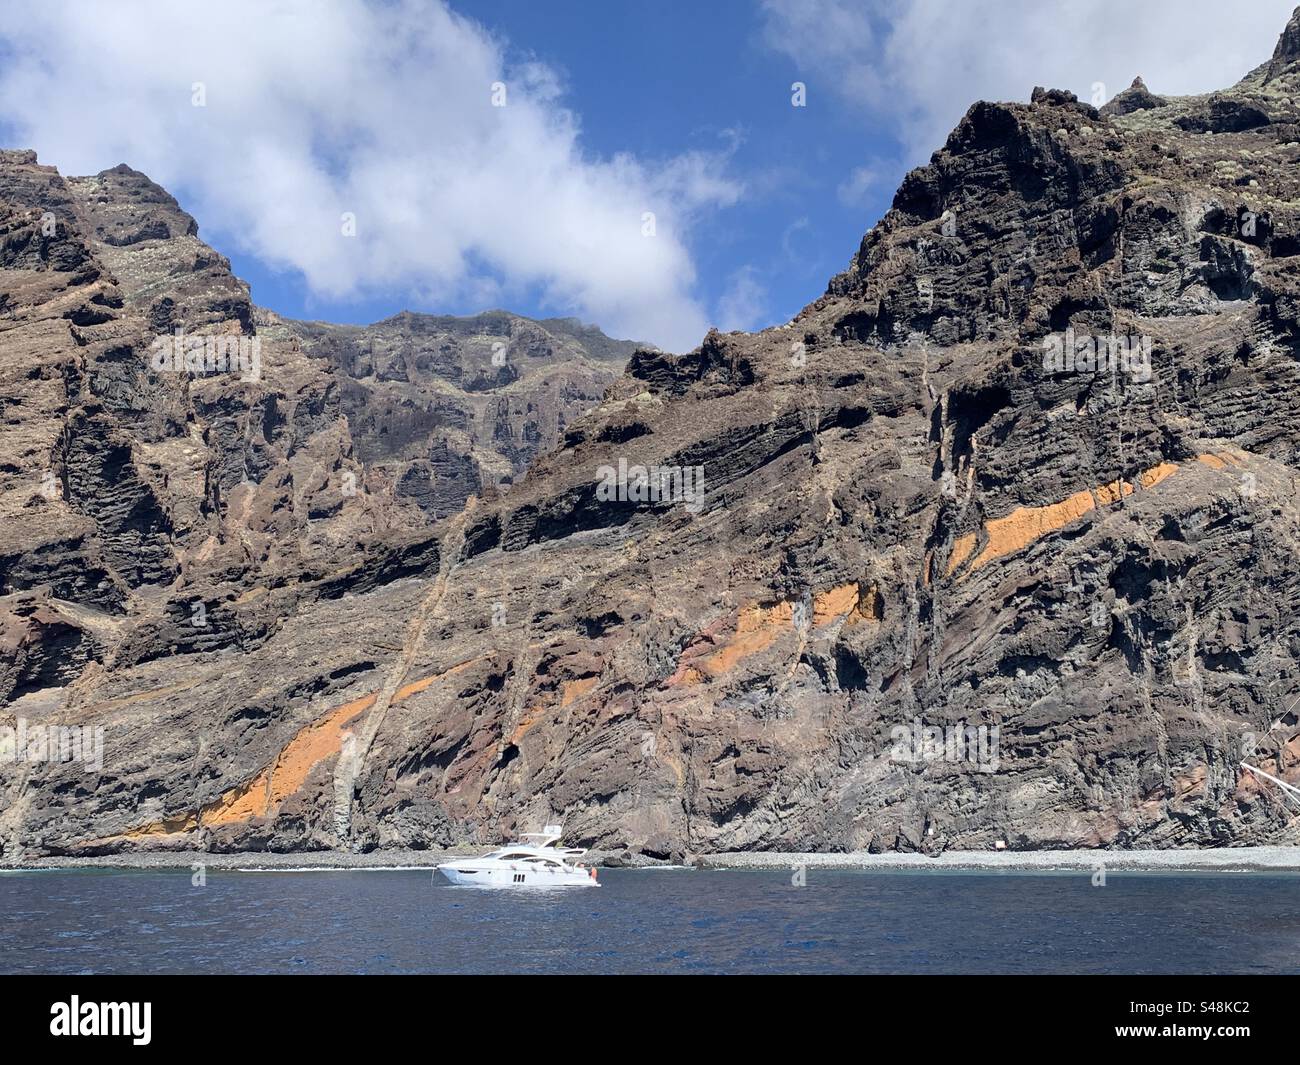 Los Gigantes cliffs in Tenerife Canary Islands Stock Photo